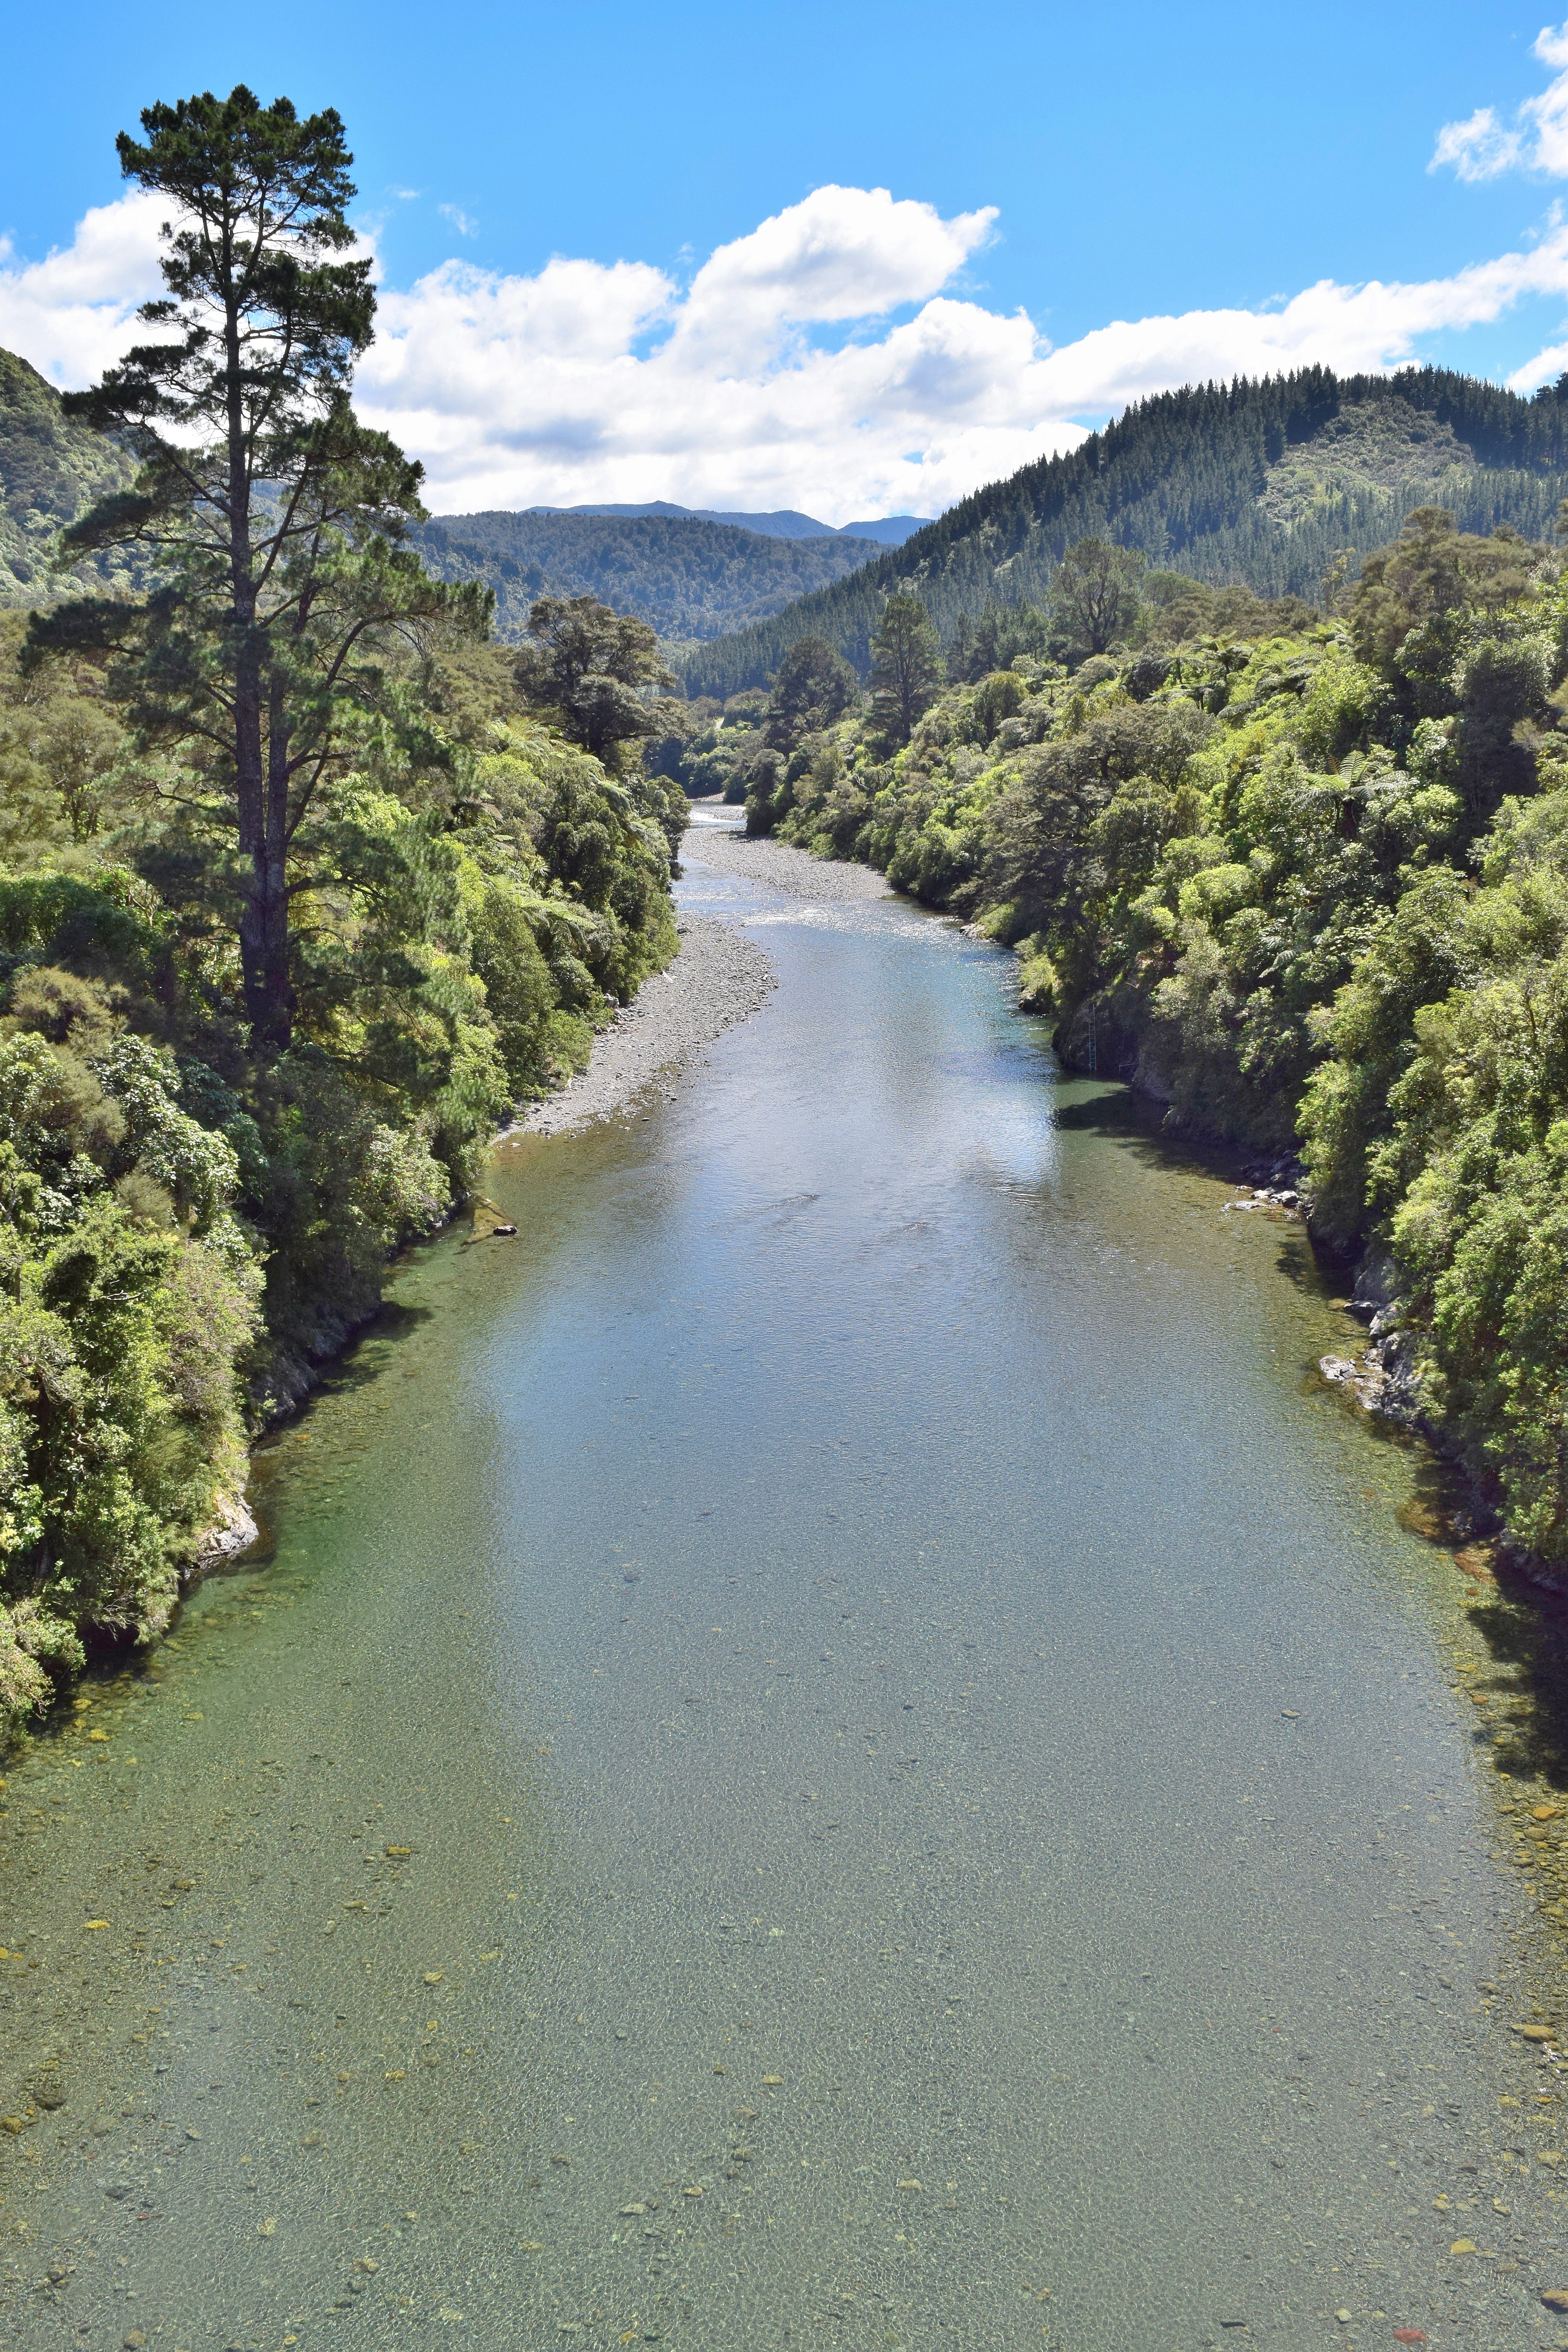 A view along the Waiōhine River on a bright sunny day